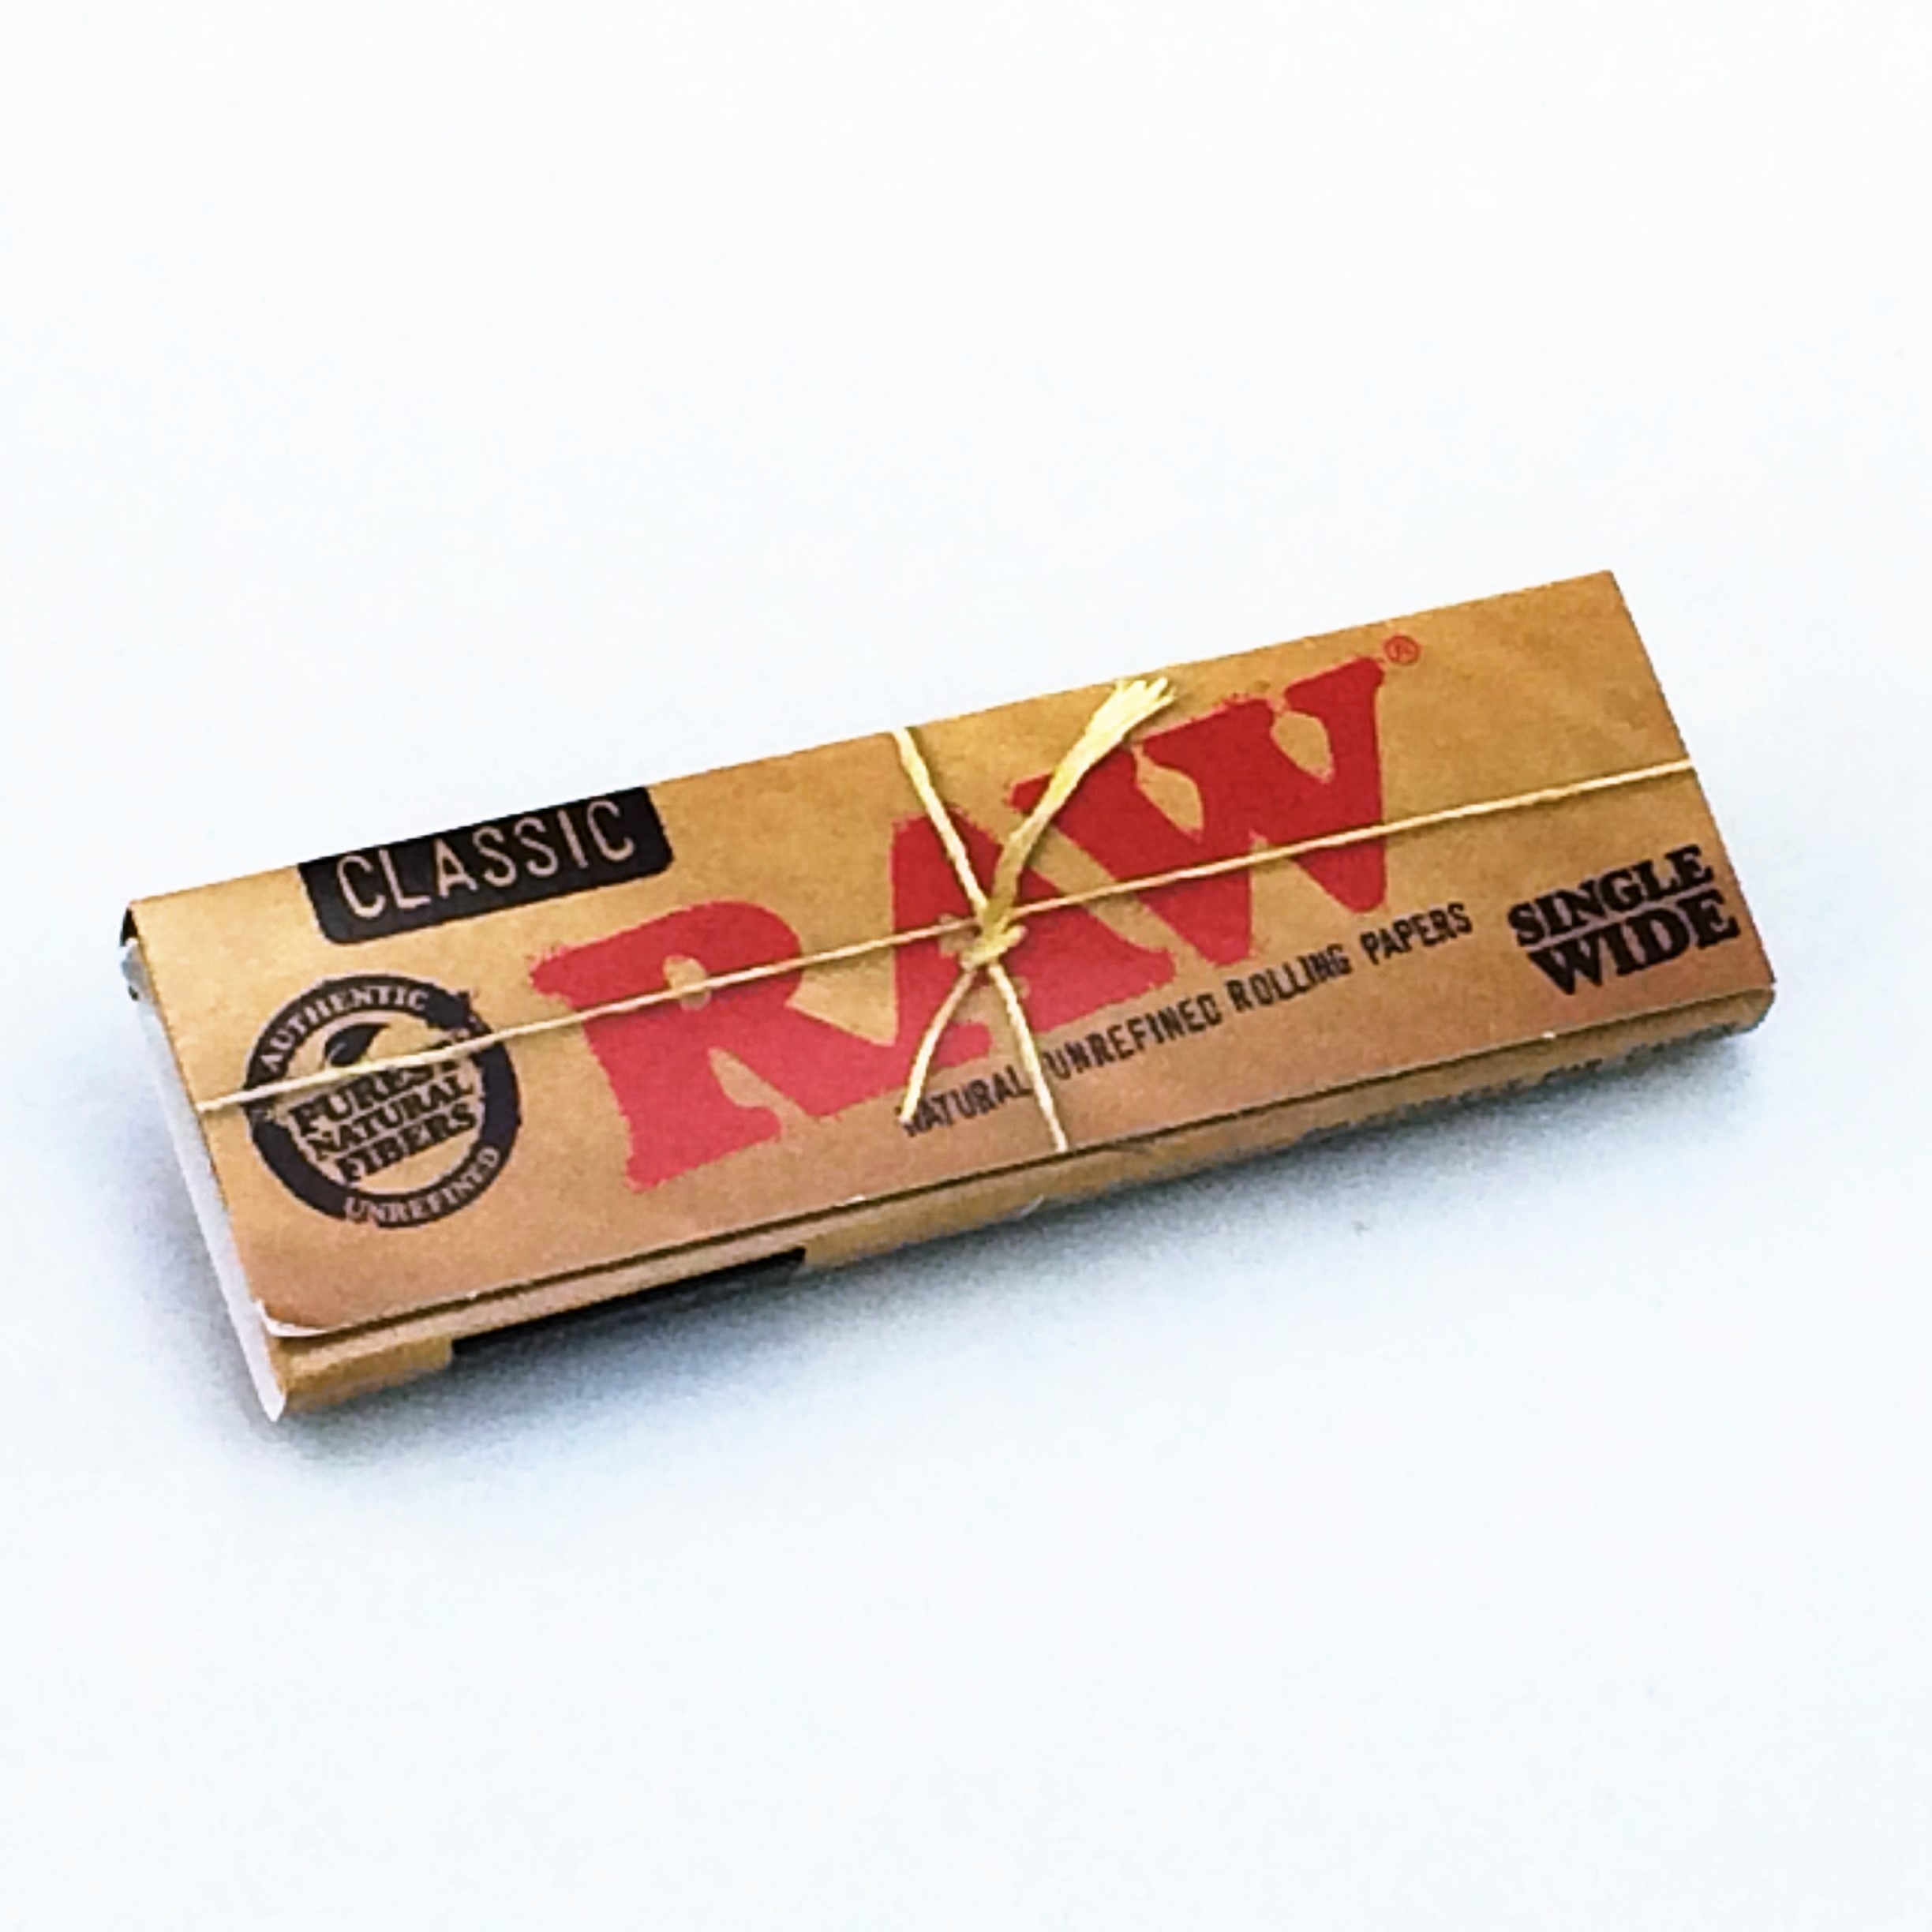 how long are raw rolling papers